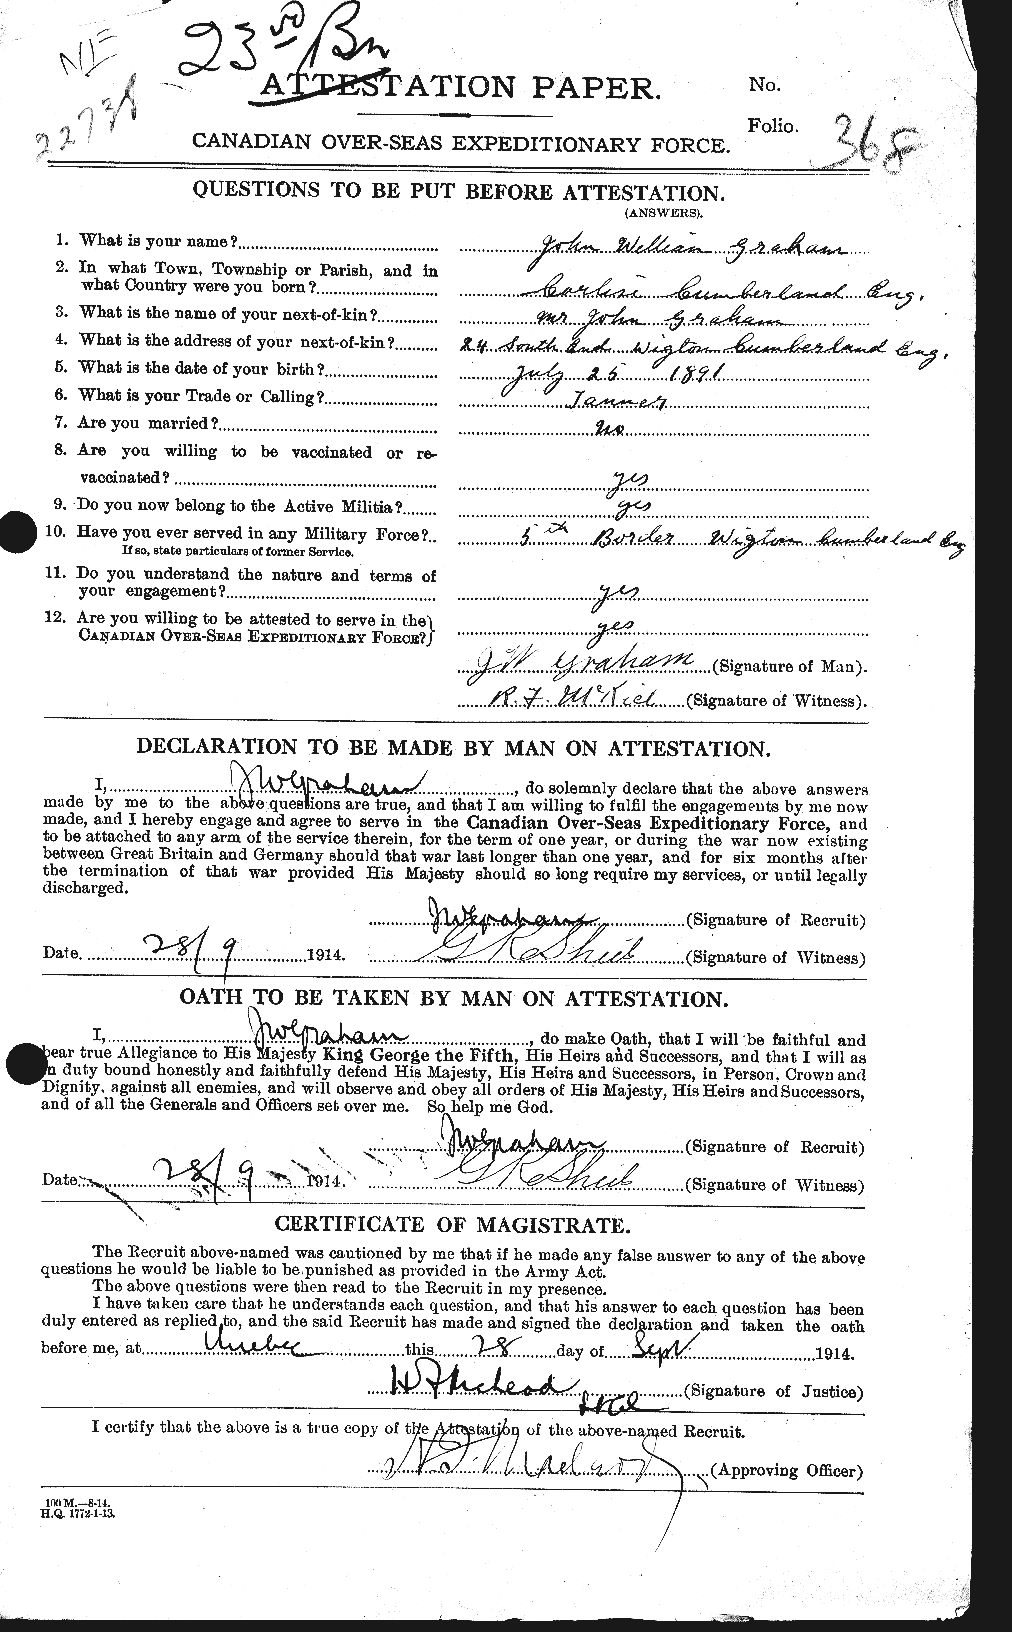 Personnel Records of the First World War - CEF 359221a